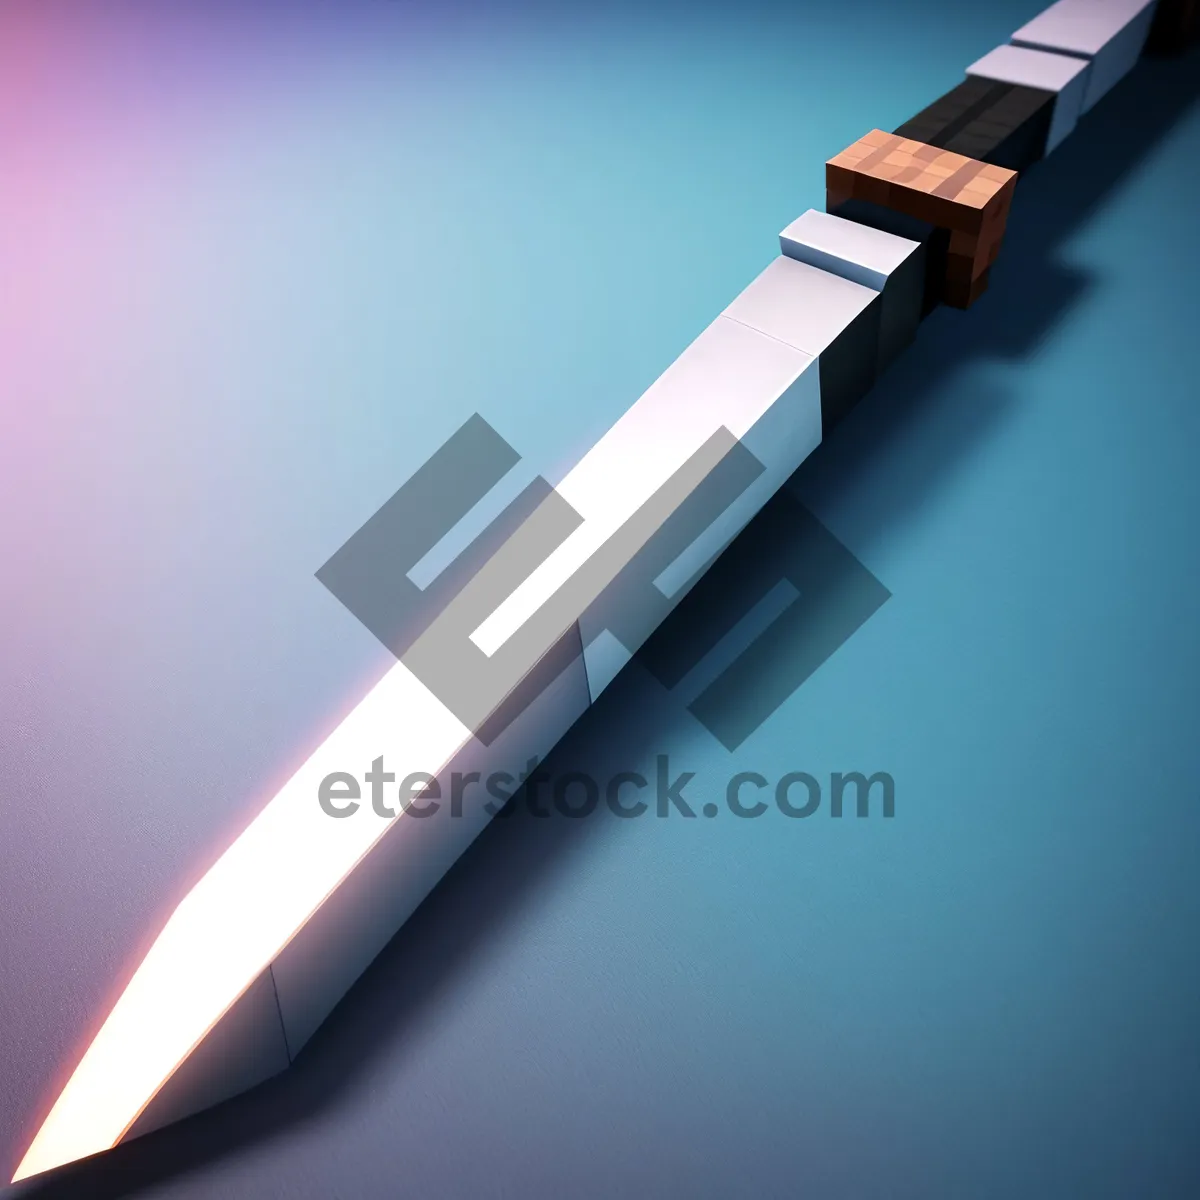 Picture of Cutting Edge: Graphic Knife Design in 3D Wallpaper